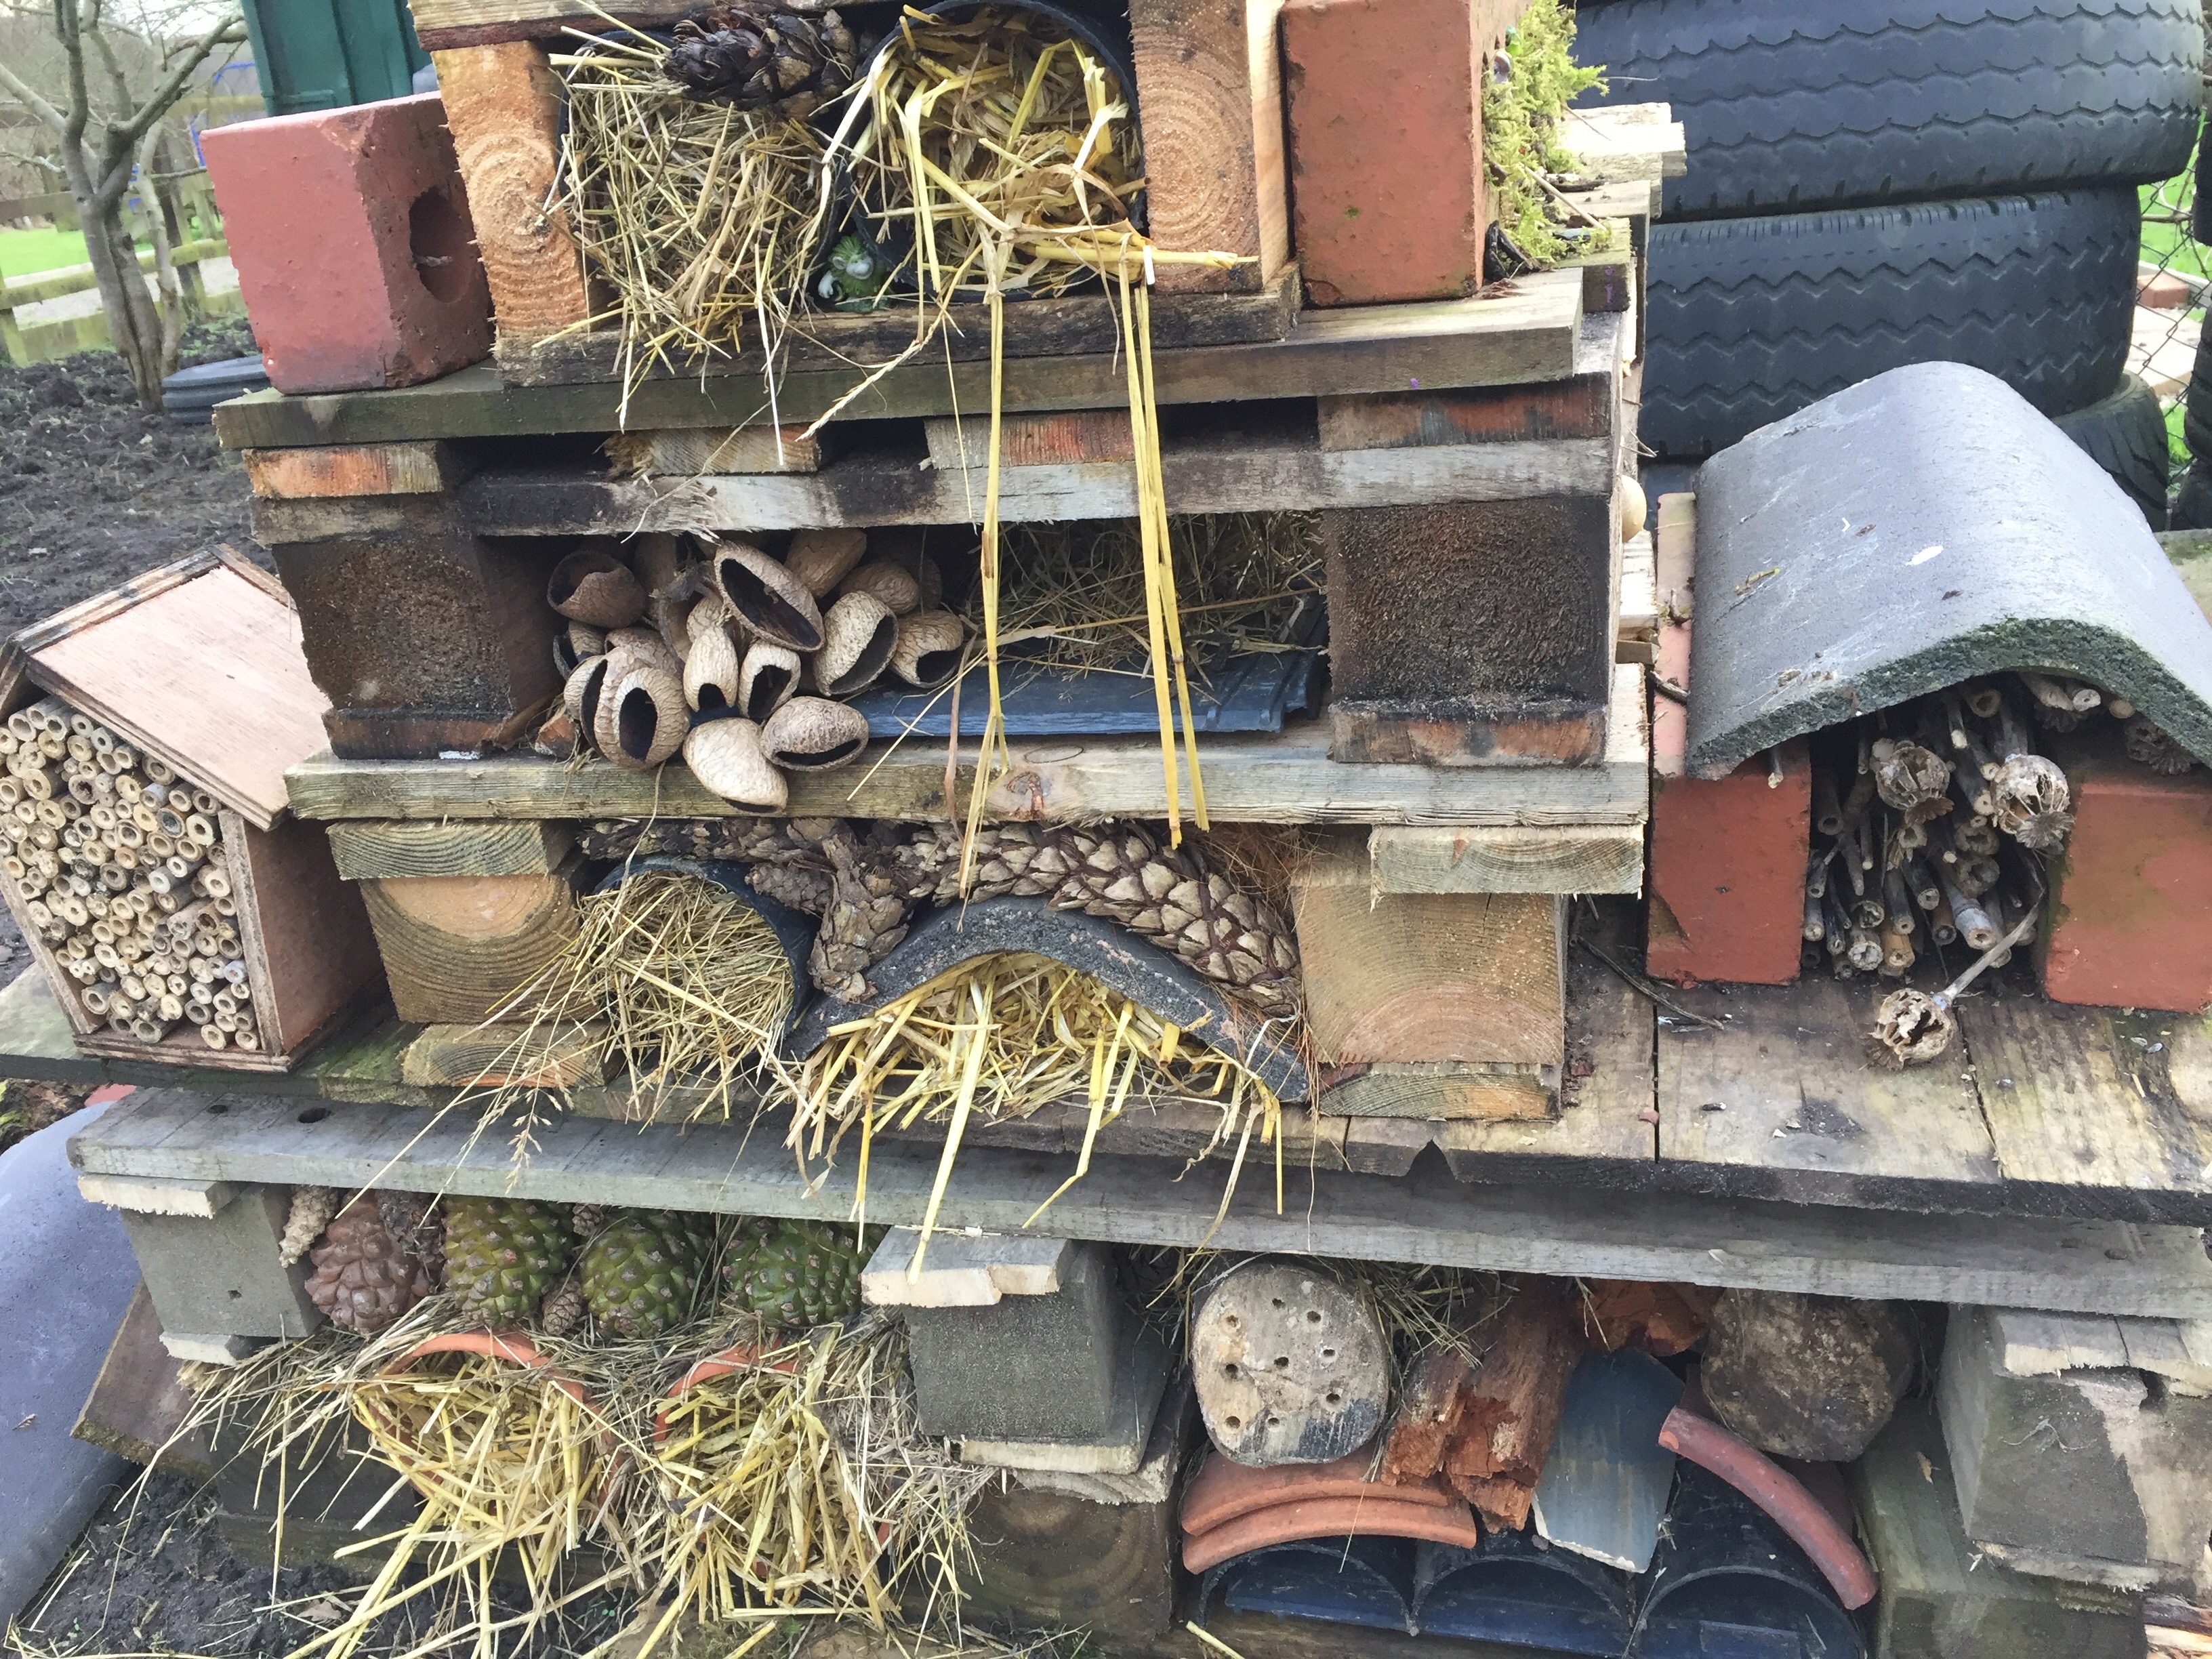 Our bug hotel is officially open!